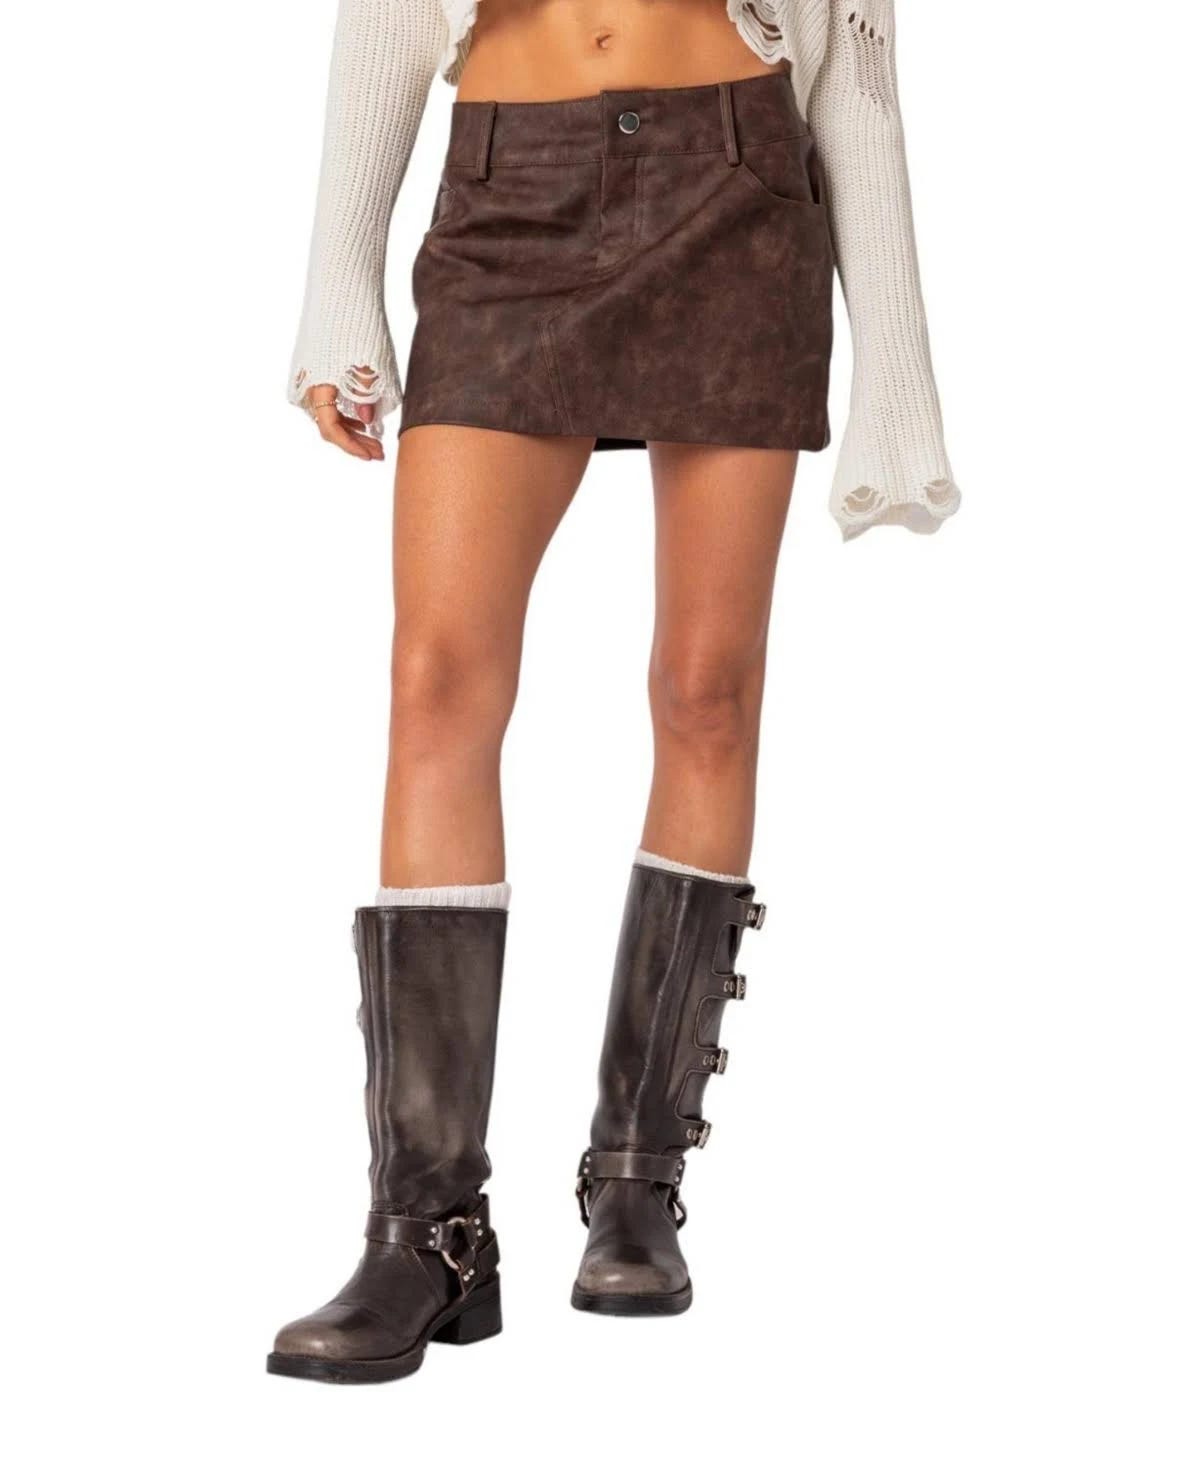 Elegant Brown Faux Leather Mini Skirt with Distressed Look | Image